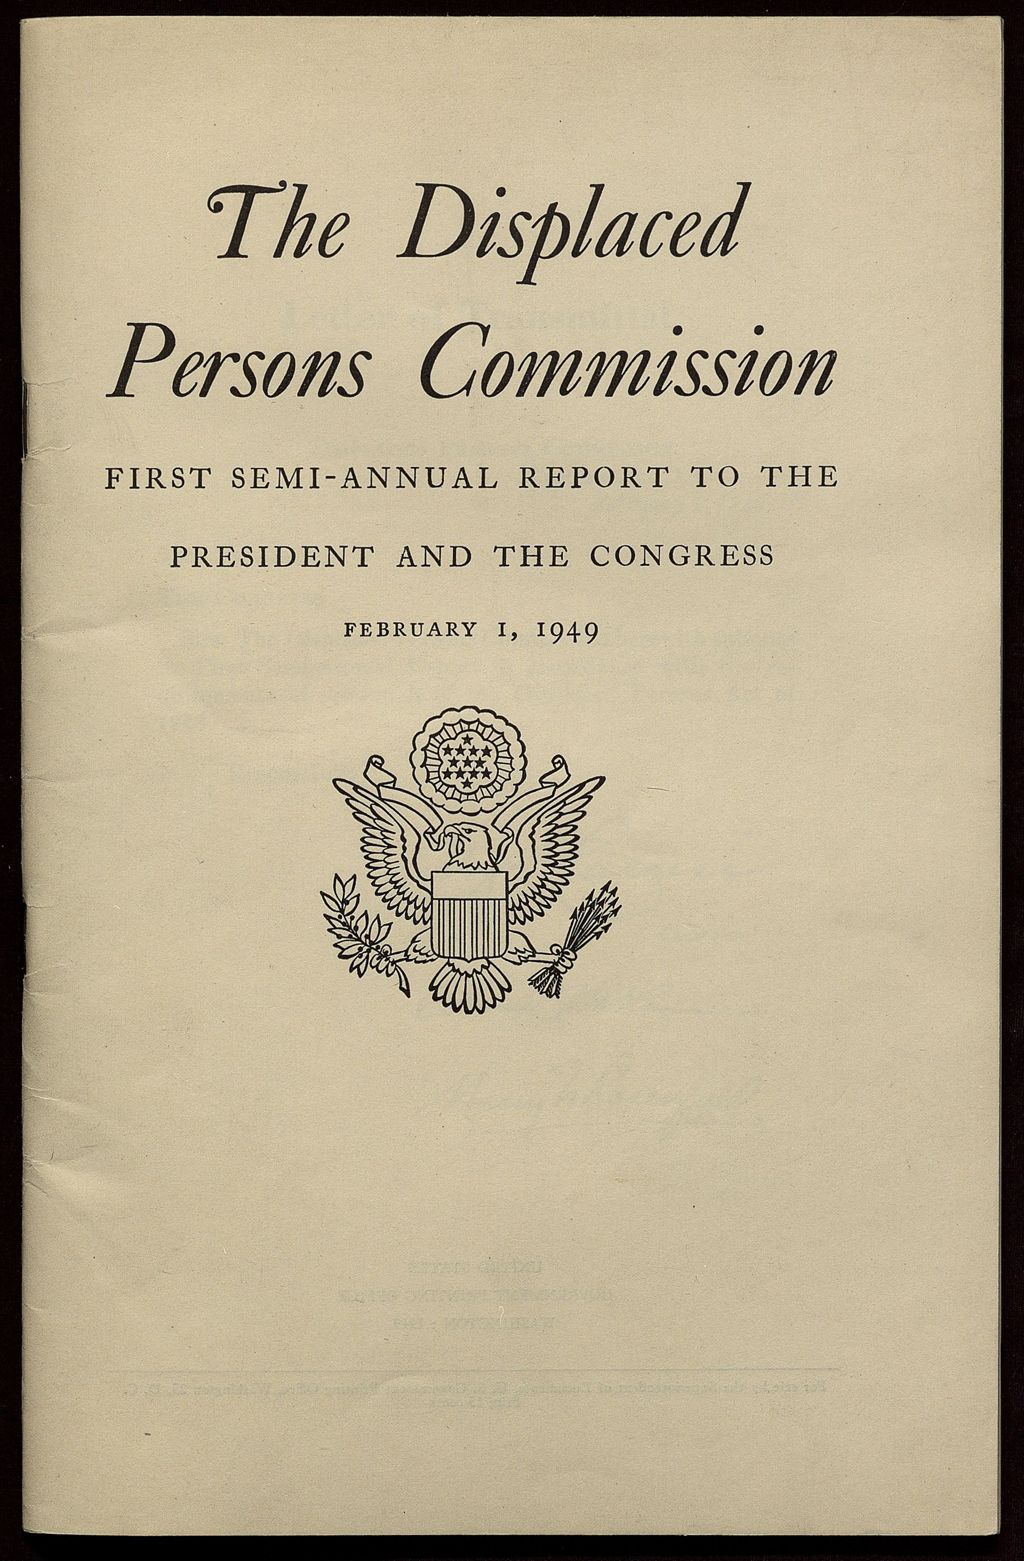 Miniature of Congressional Record articles of interest, 1949-1960 (Folder 18)